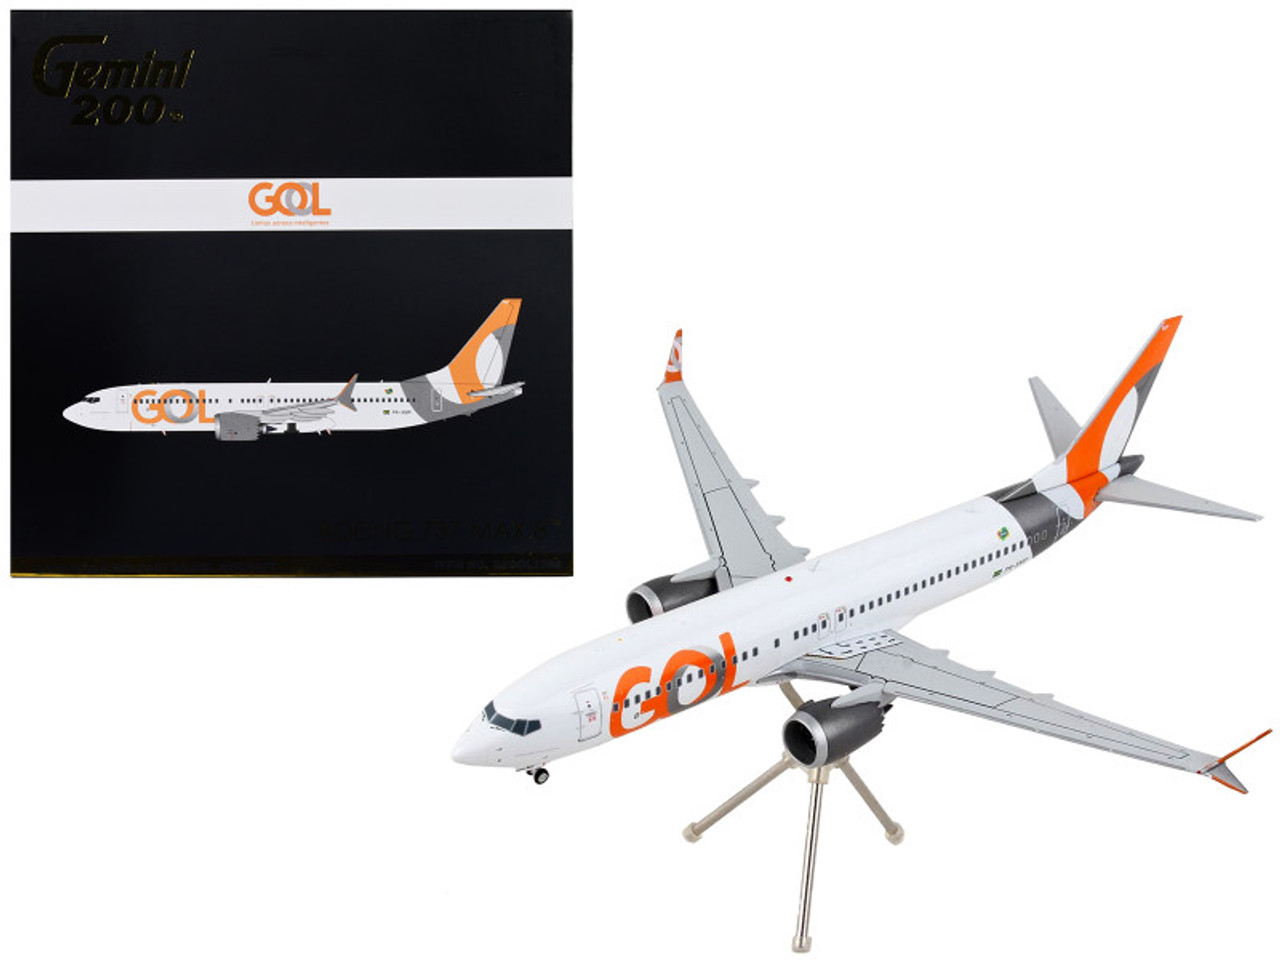 Boeing 737 MAX 8 Commercial Aircraft "Gol Linhas Aereas Inteligentes" White with Orange Tail "Gemini 200" Series 1/200 Diecast Model Airplane by GeminiJets